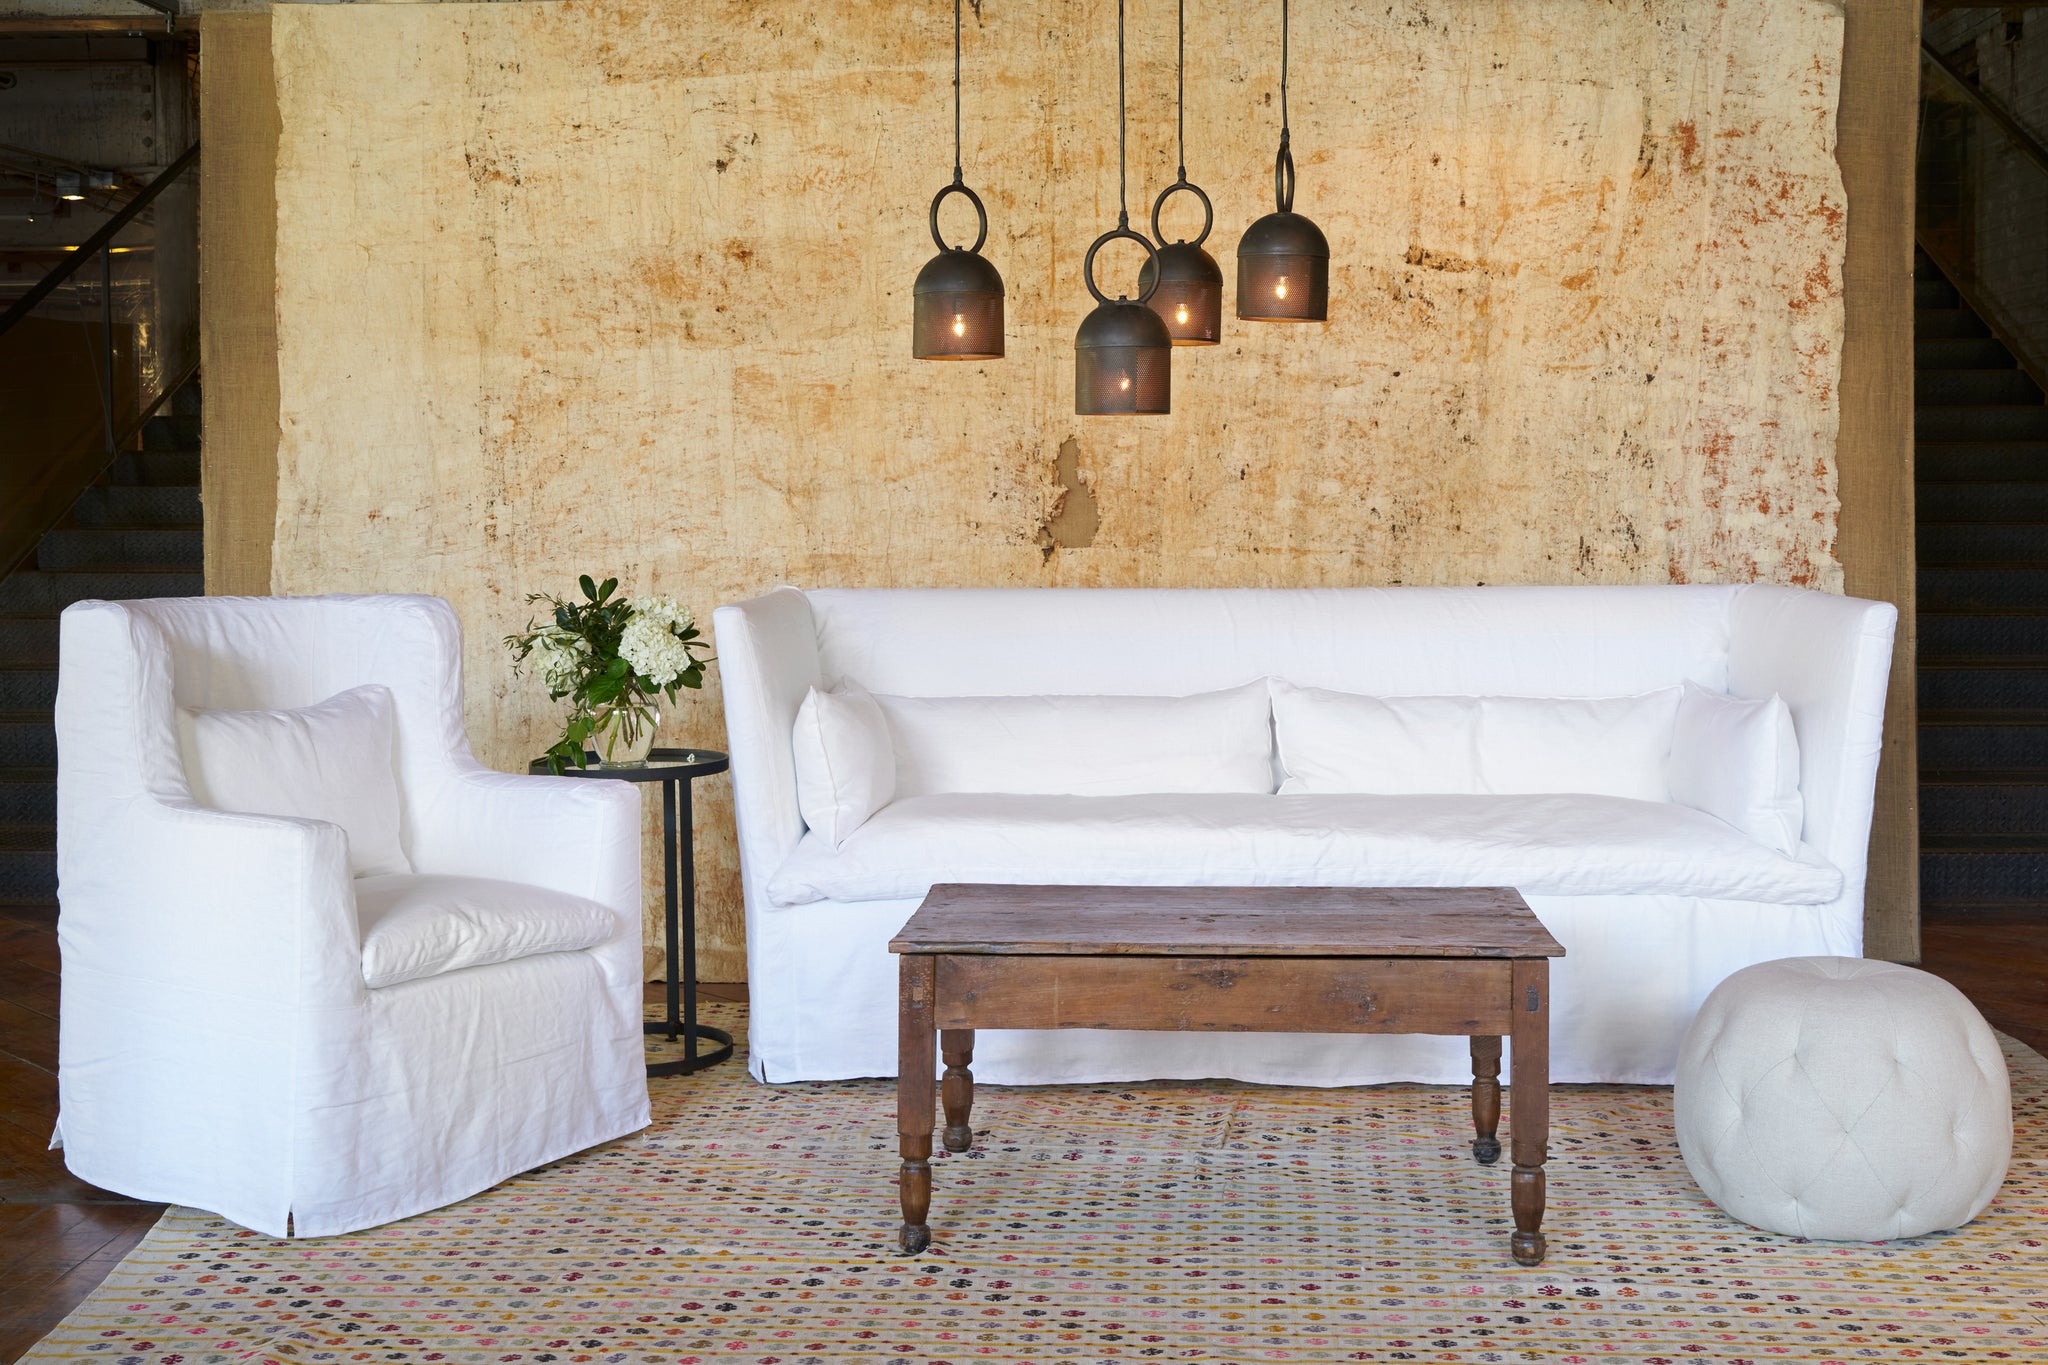  White chair on the left of a white sofa in front of a yellow backdrop and 4 metal light pendants. A wood coffee table and a tufted pouf ottoman are in front. Photographed in Otis White. 